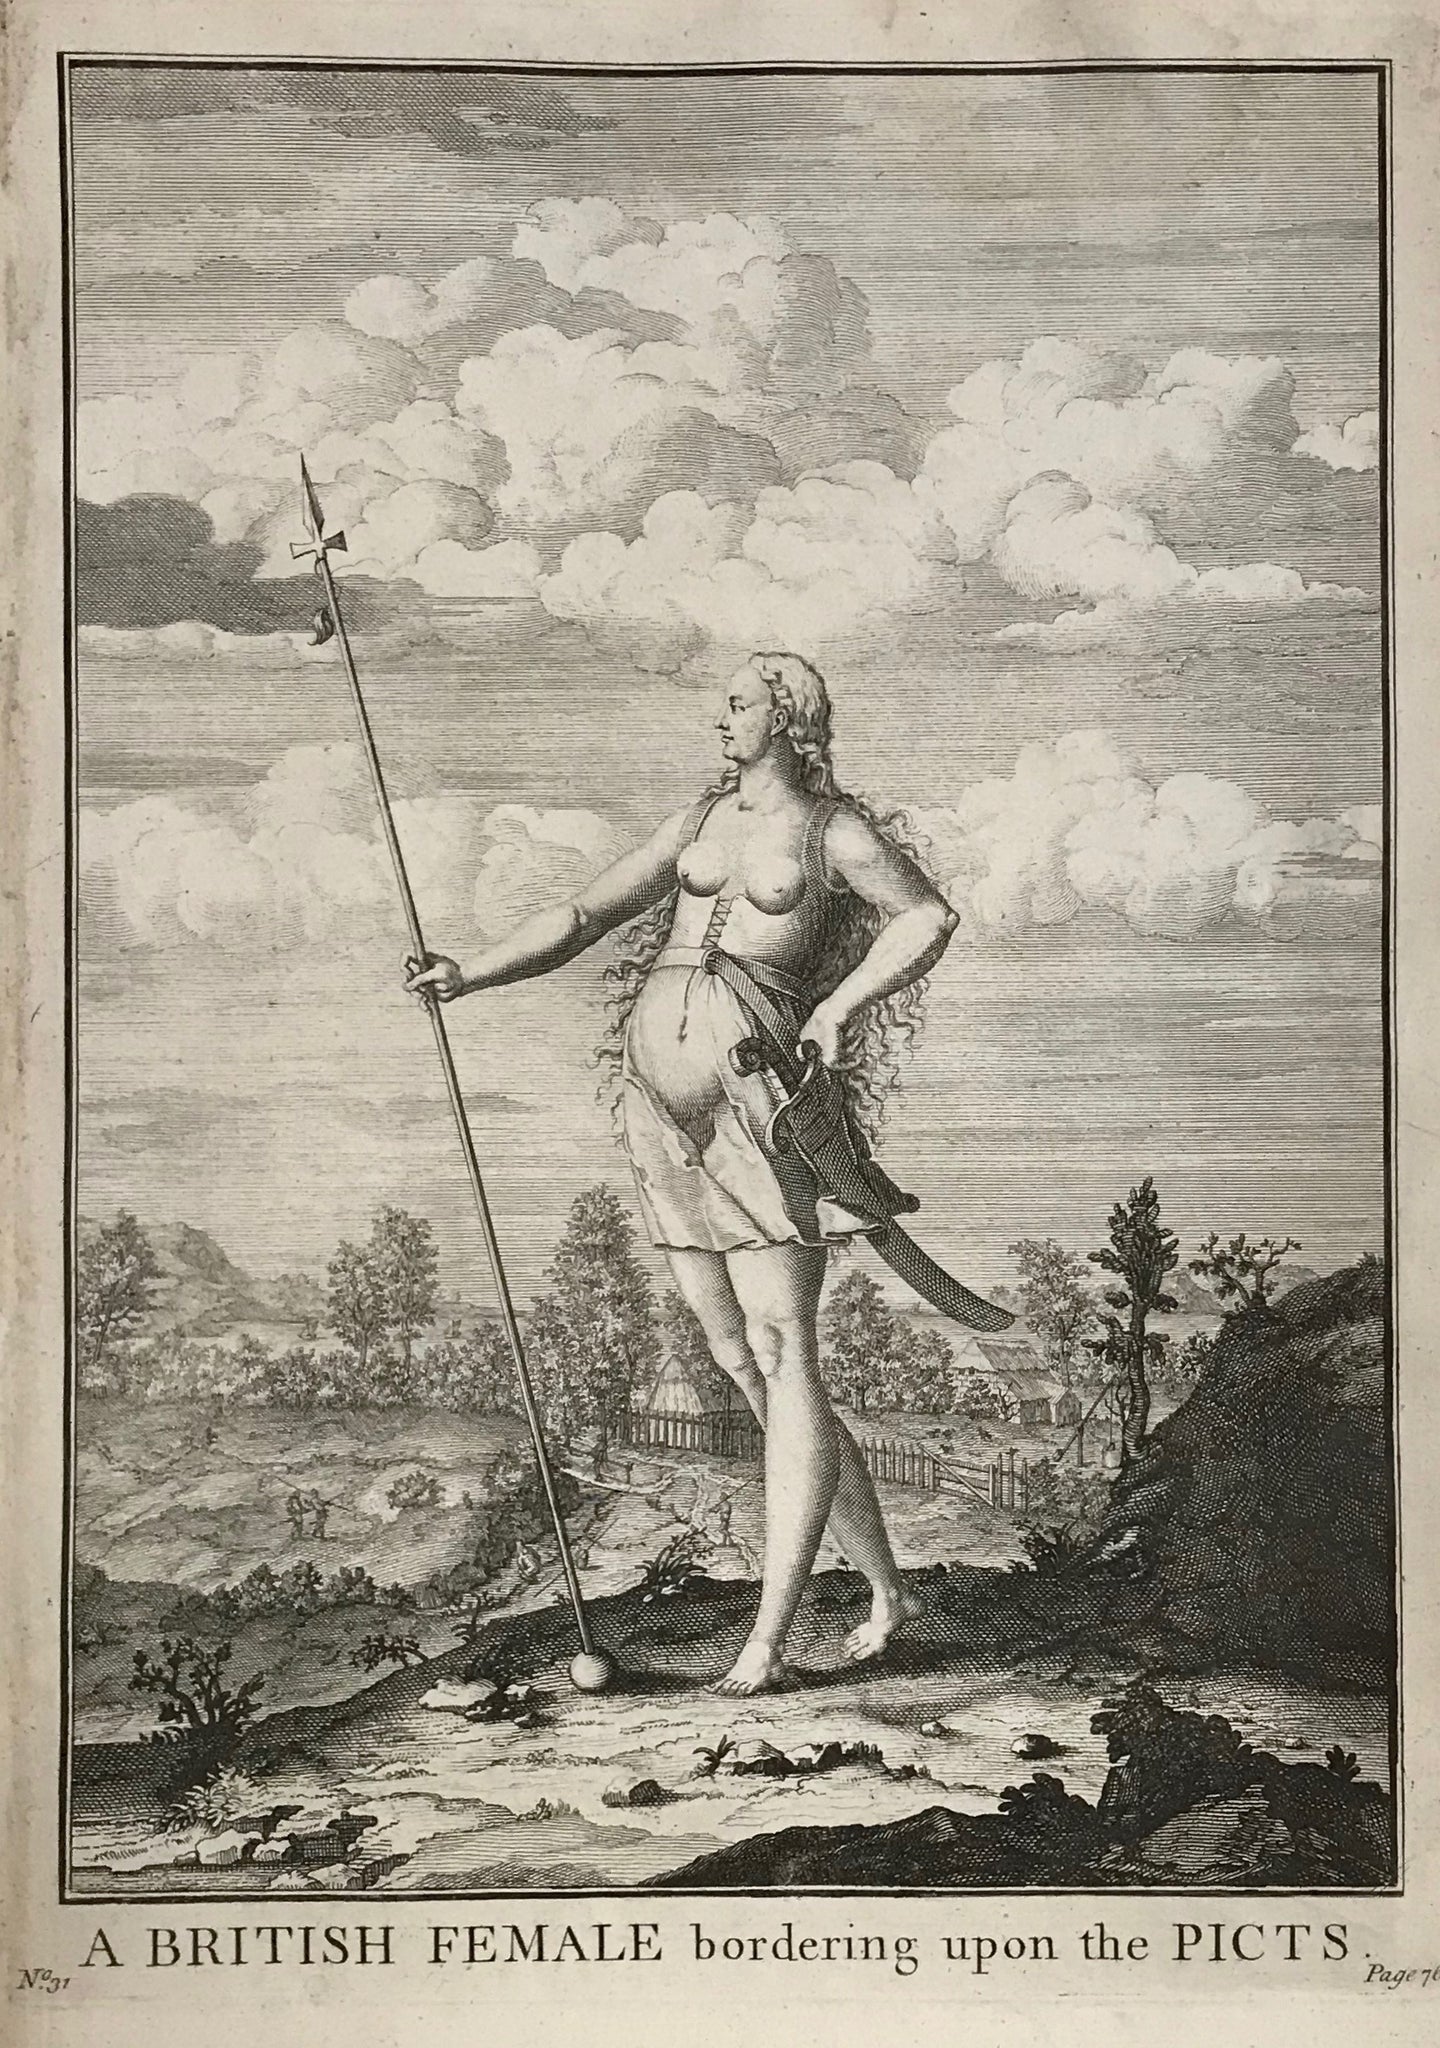 Antique Prints of the Celts (Kelten)  From Julius Ceasar's "War Commentaries on the Celts", in which he described the somewhat perplexing encounters with the people north of the Alps. When you look at the engravings you kind of know why the Romans, far advanced in culture and techniques of all kinds, were bewildered.